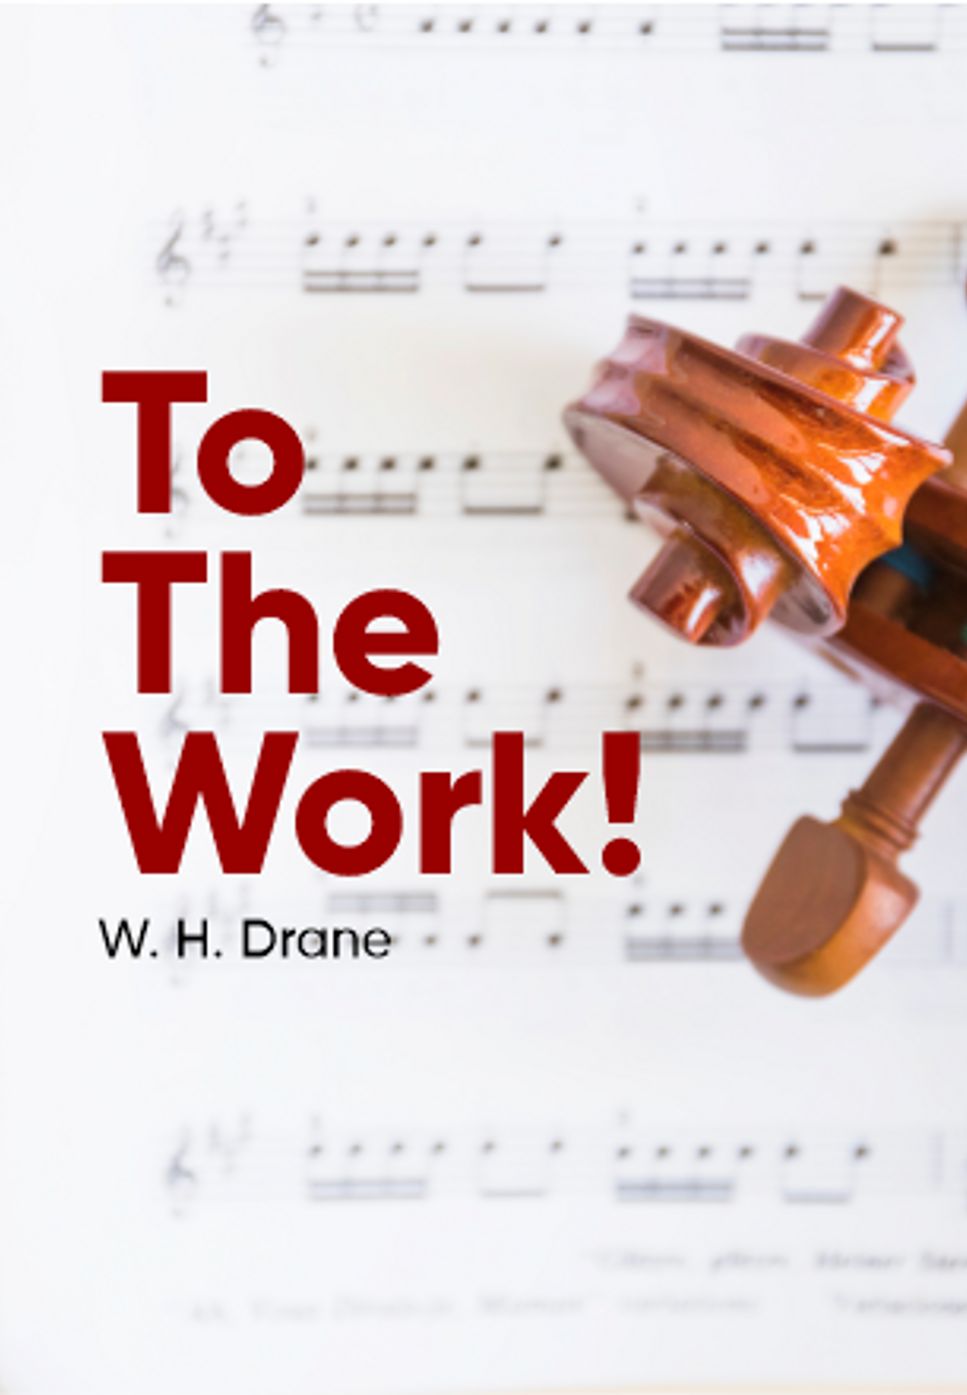 William H. Doane - To the work! to the work! (Toiling On) (Orchestra) by Yosep DA